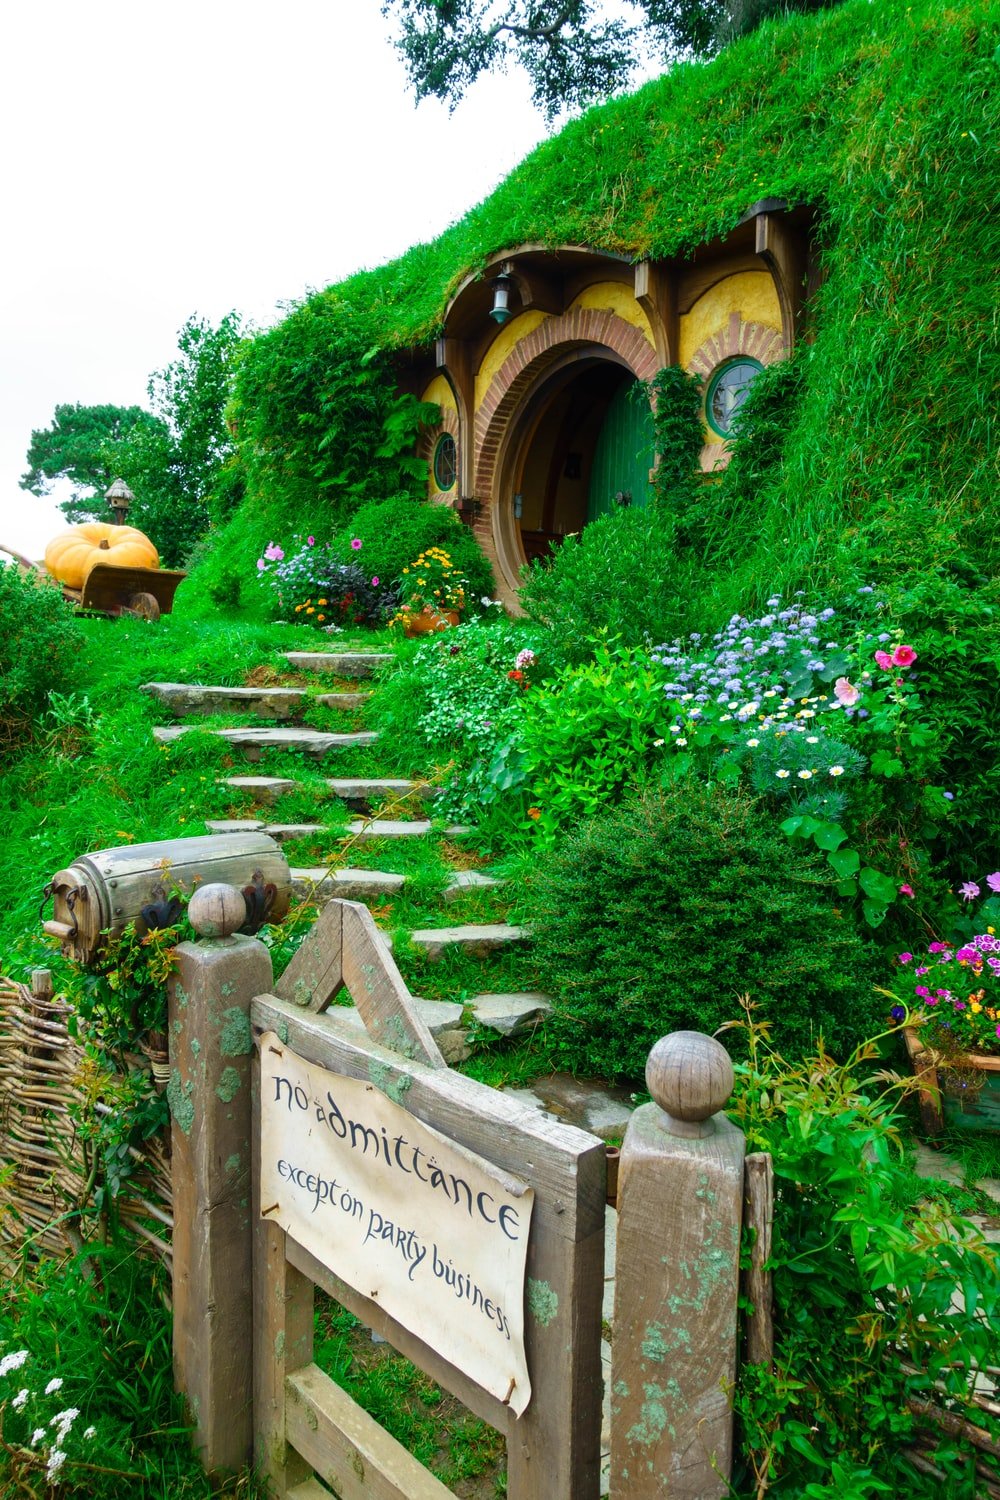 Hobbit House Picture. Download Free Image